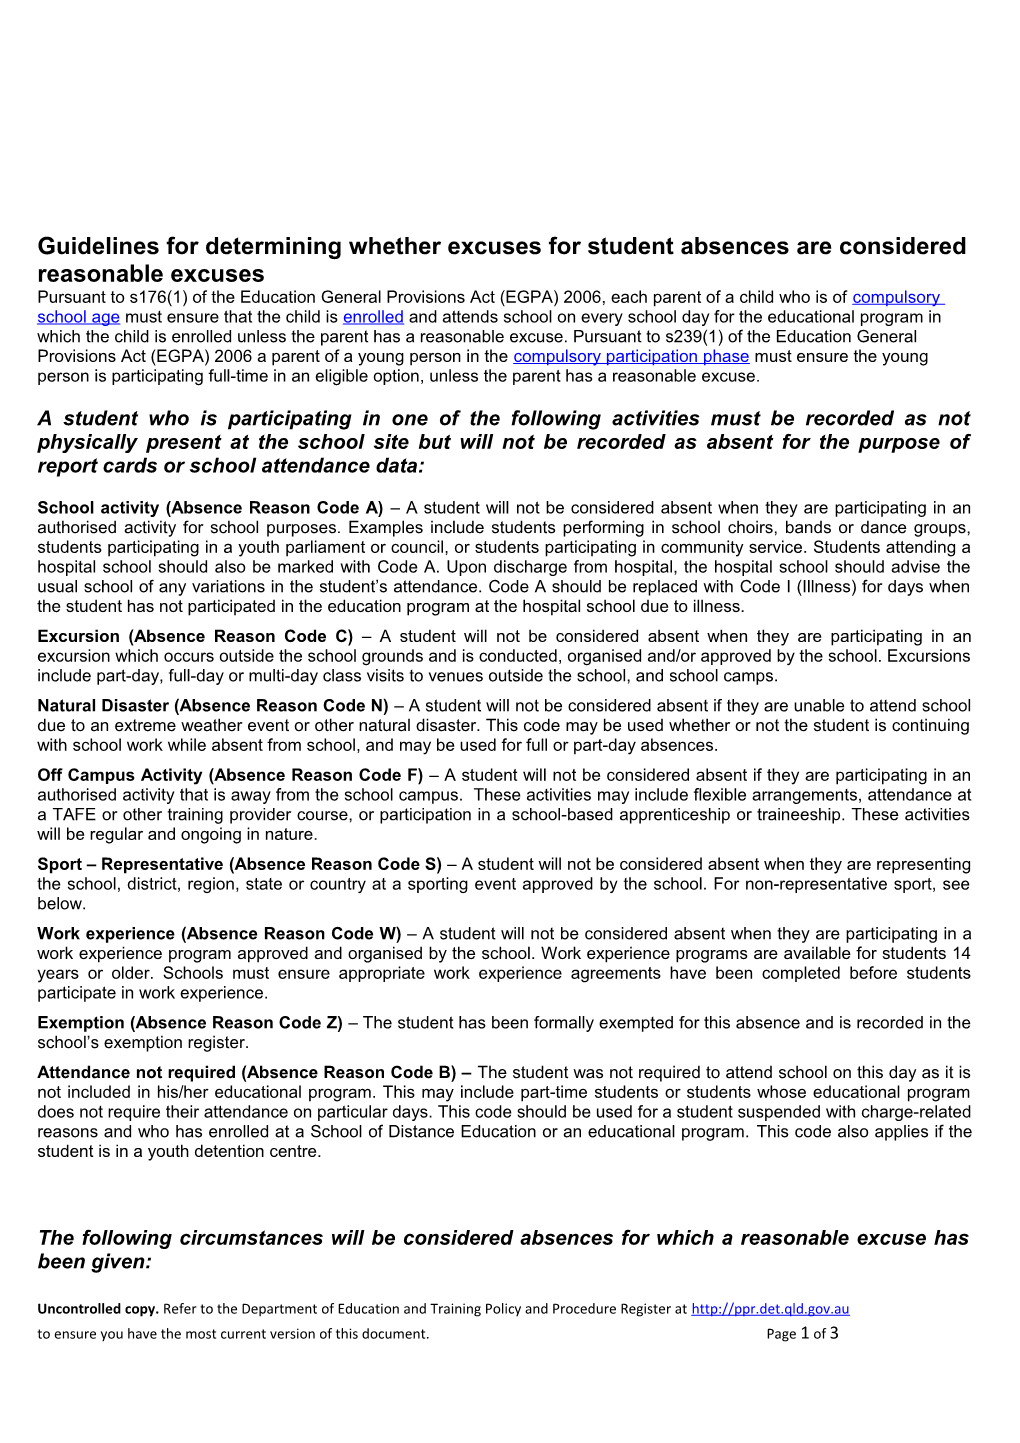 Guidelines for Determining Whether Excuses for Student Absences Are Considered Reasonable